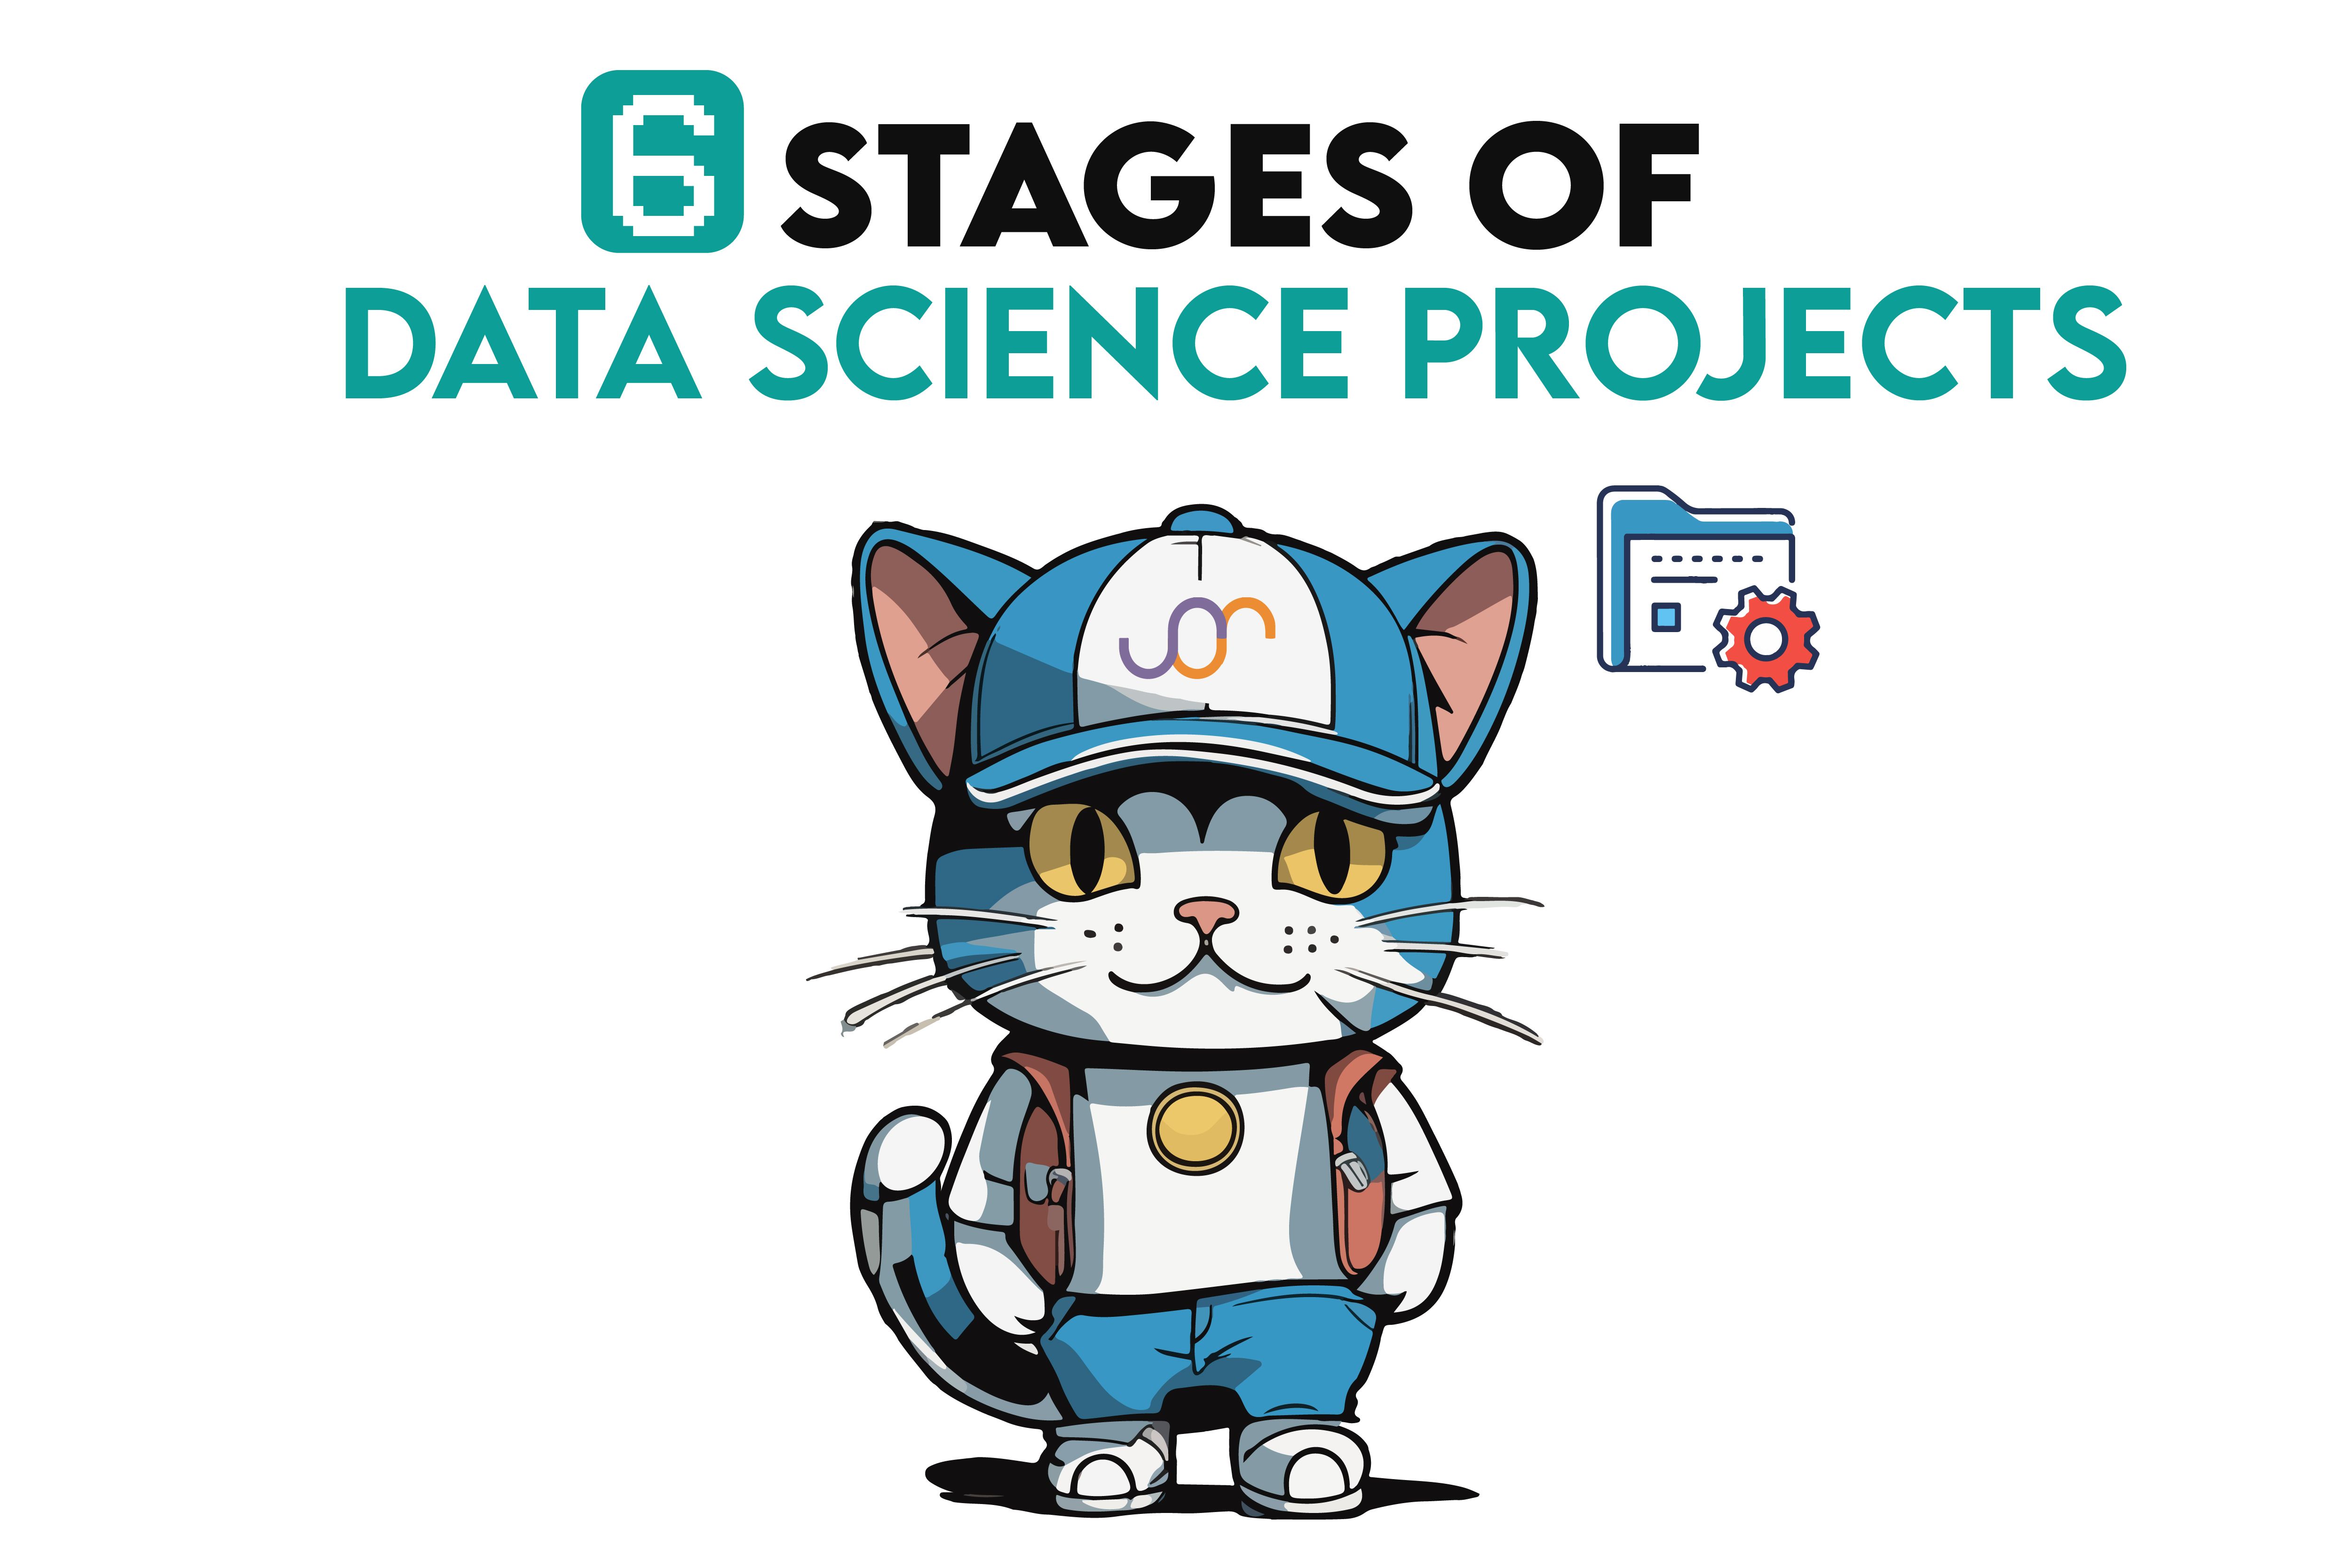 6 Stages of Data Science Project